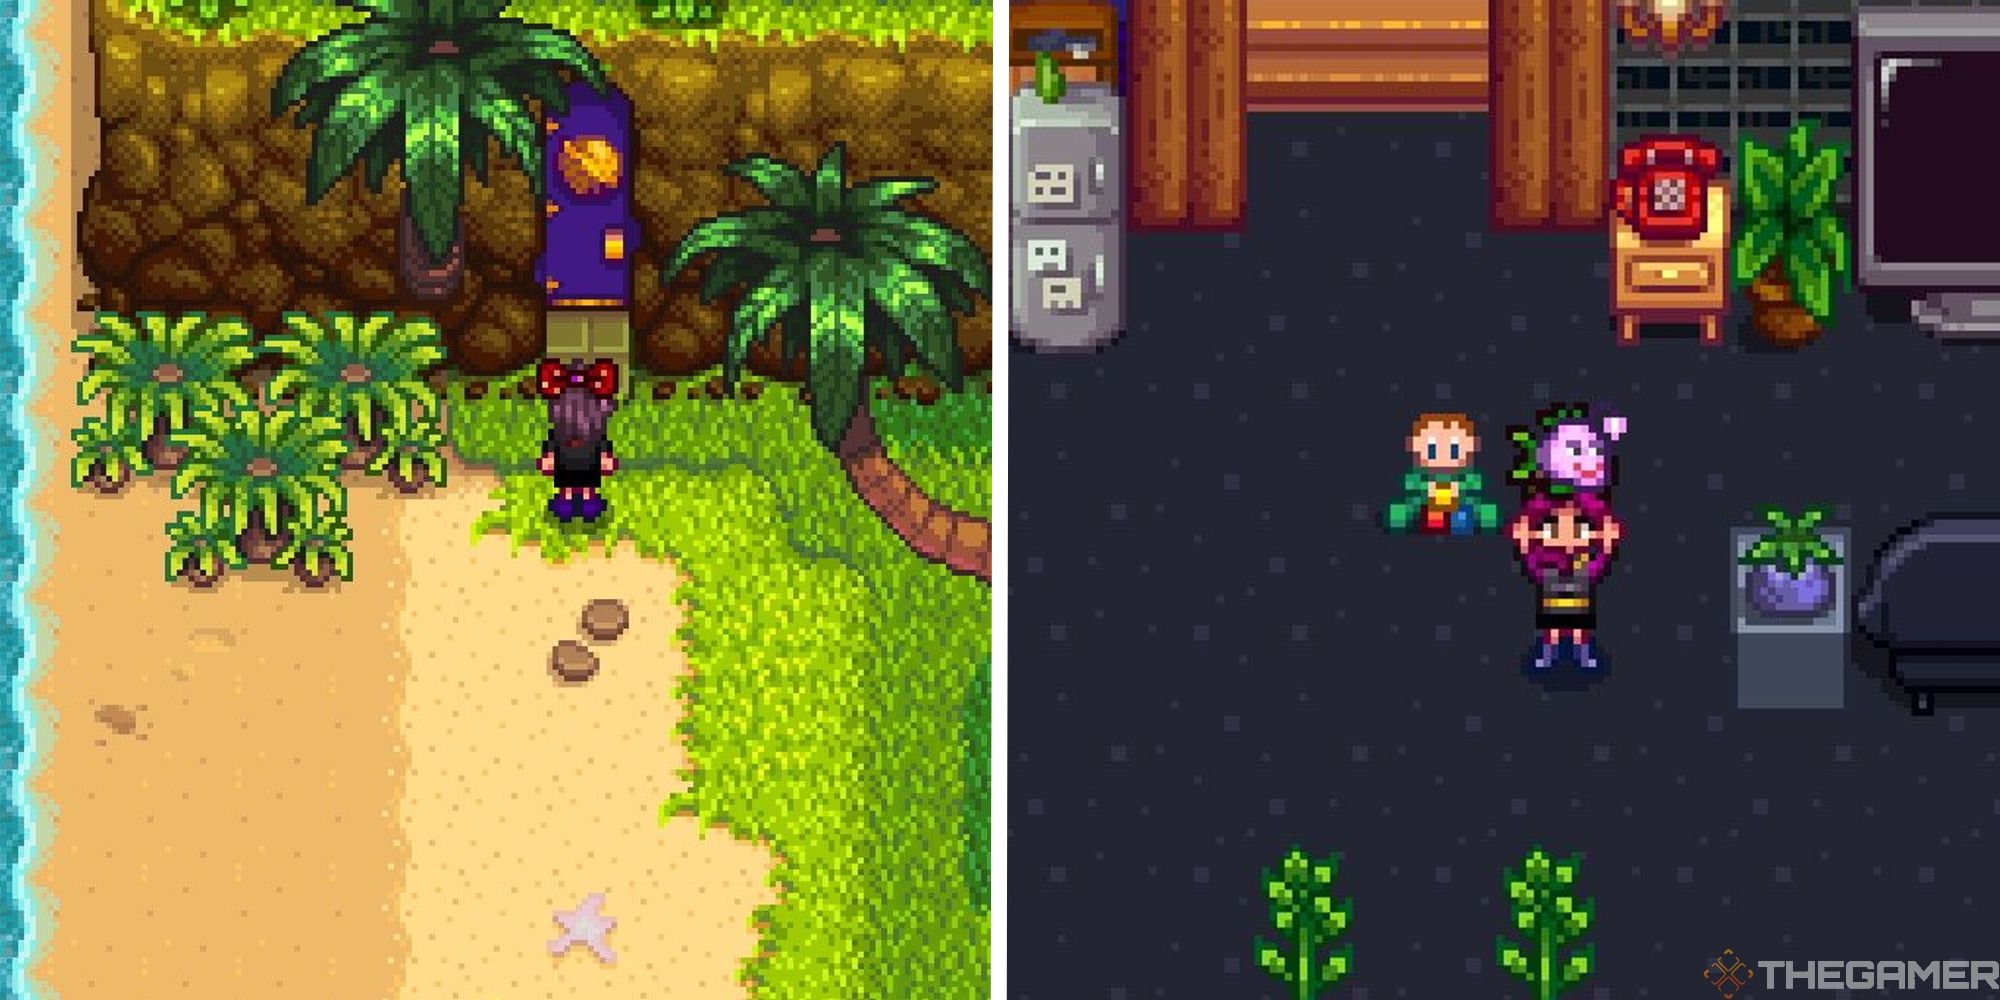 image of walnut room door next to image of player holding up a fish